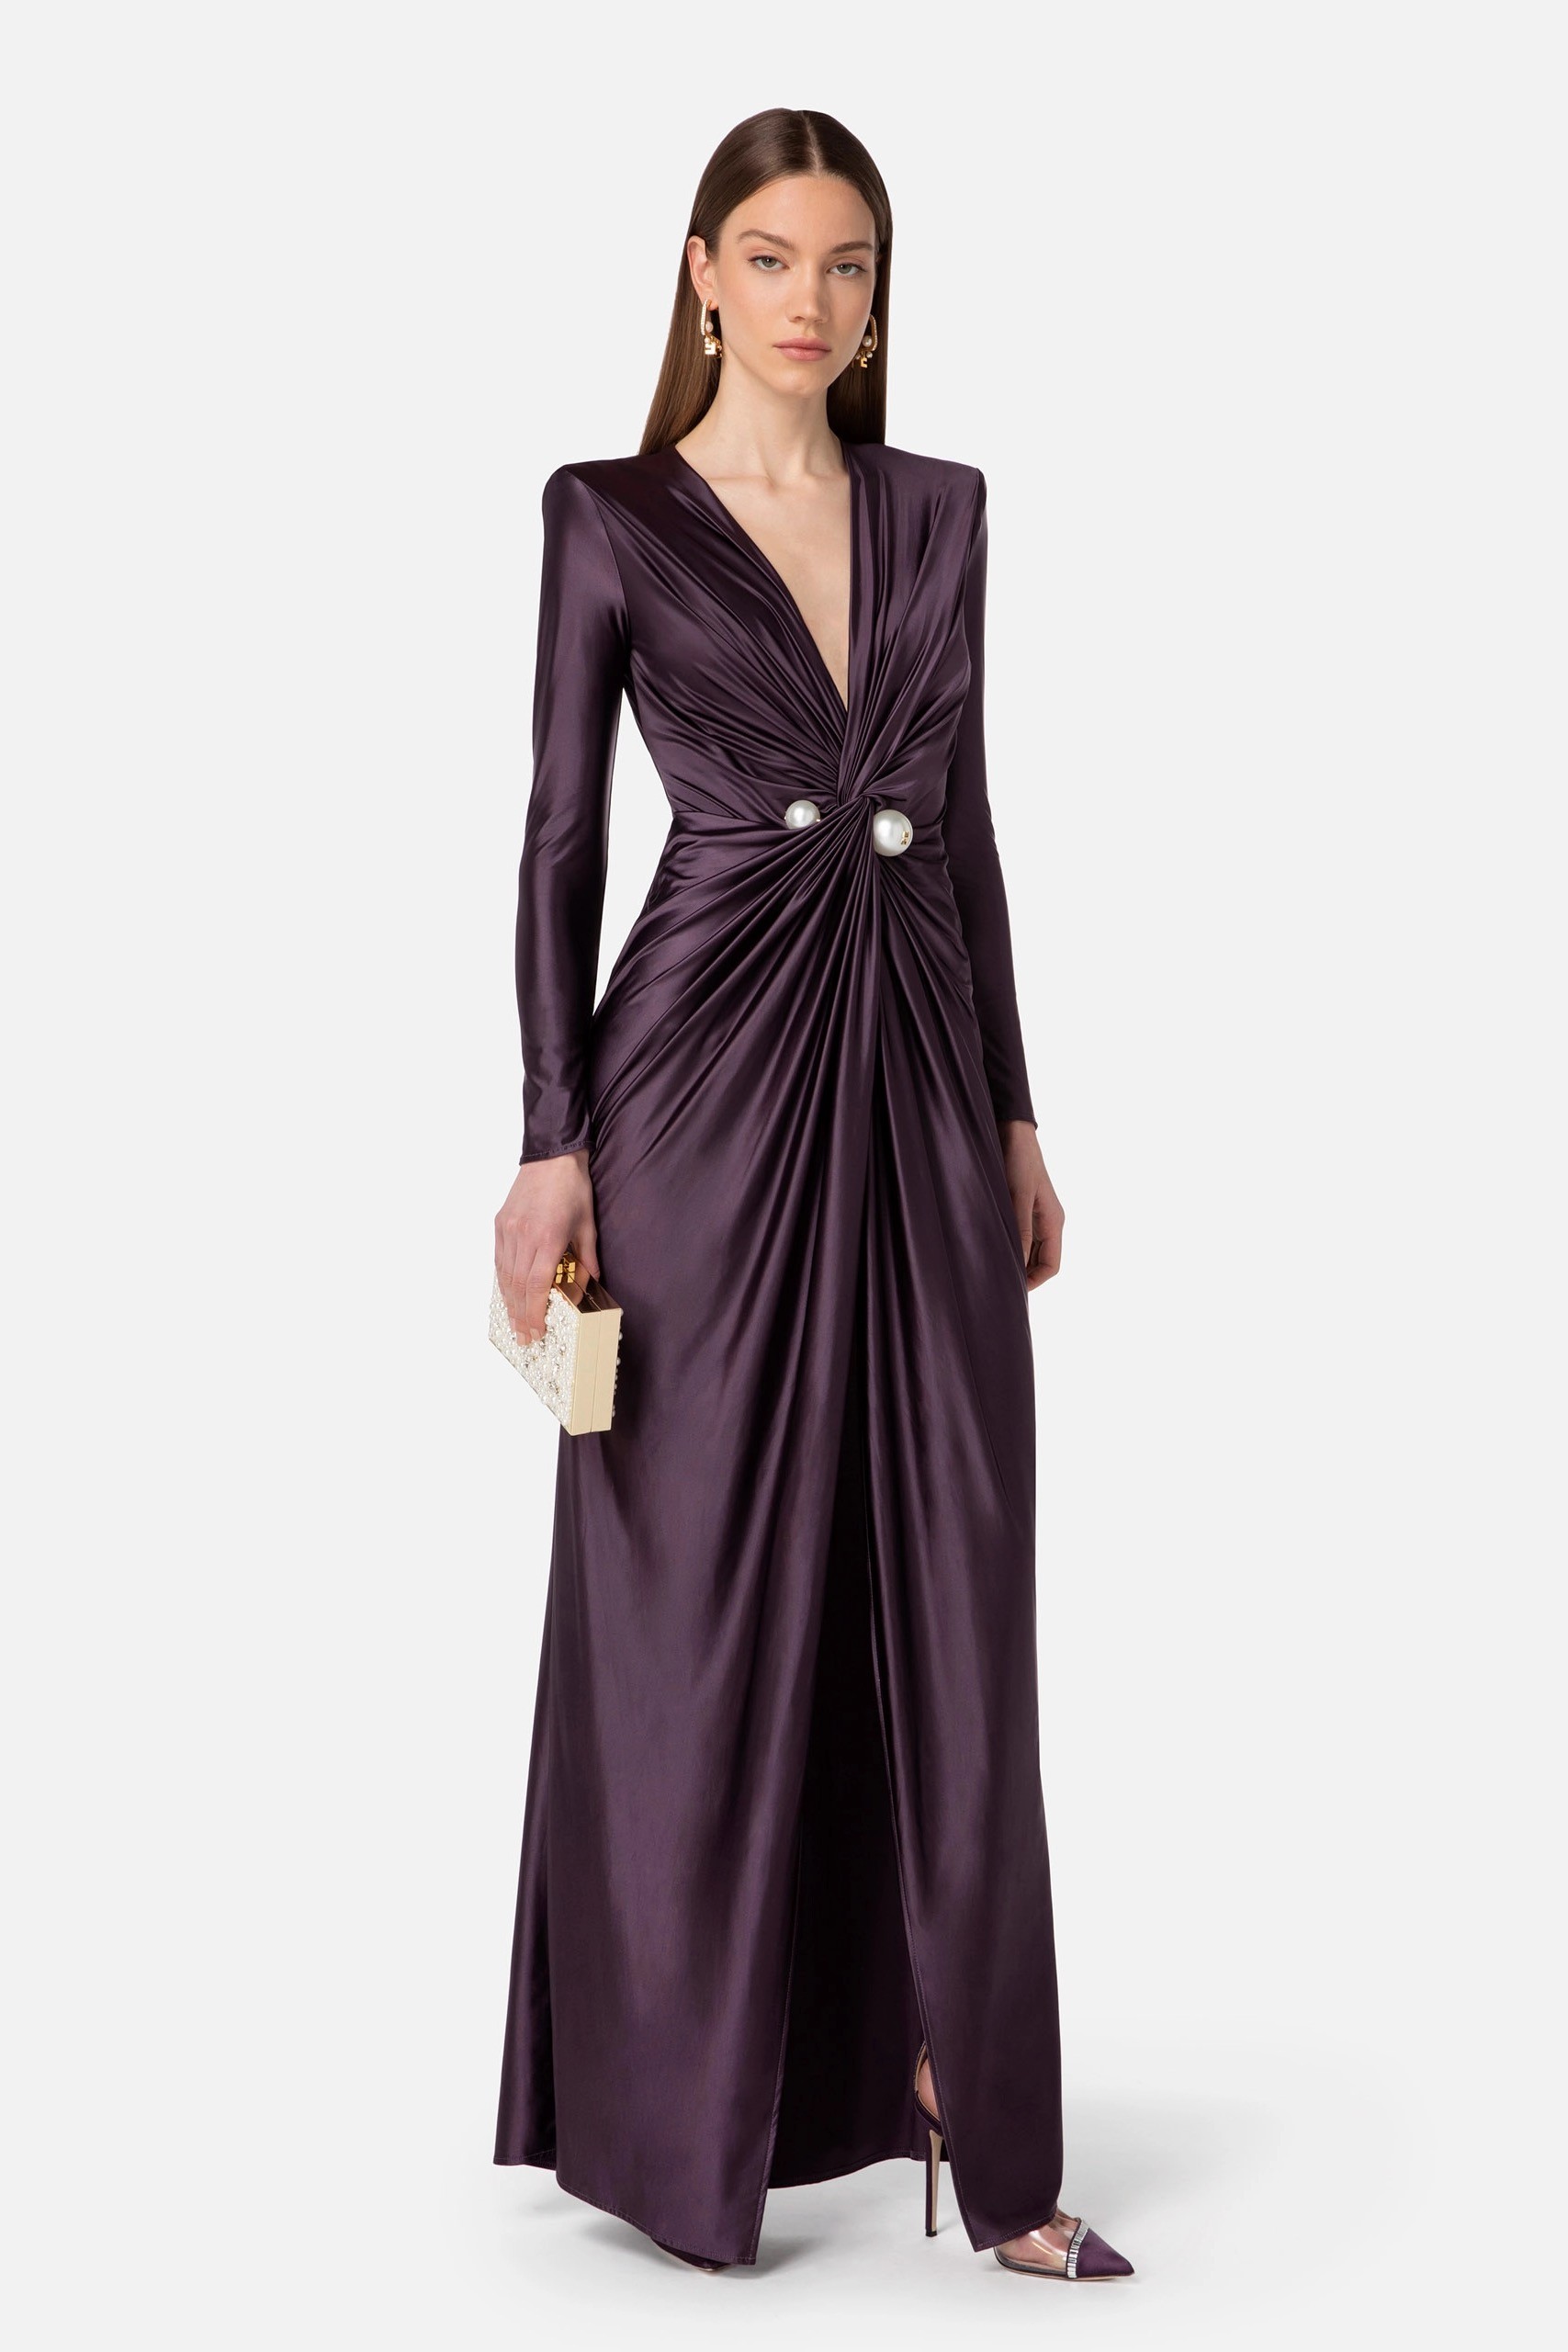 Elisabetta Franchi - Red Carpet Dress In Lycra With Pearls - Plum